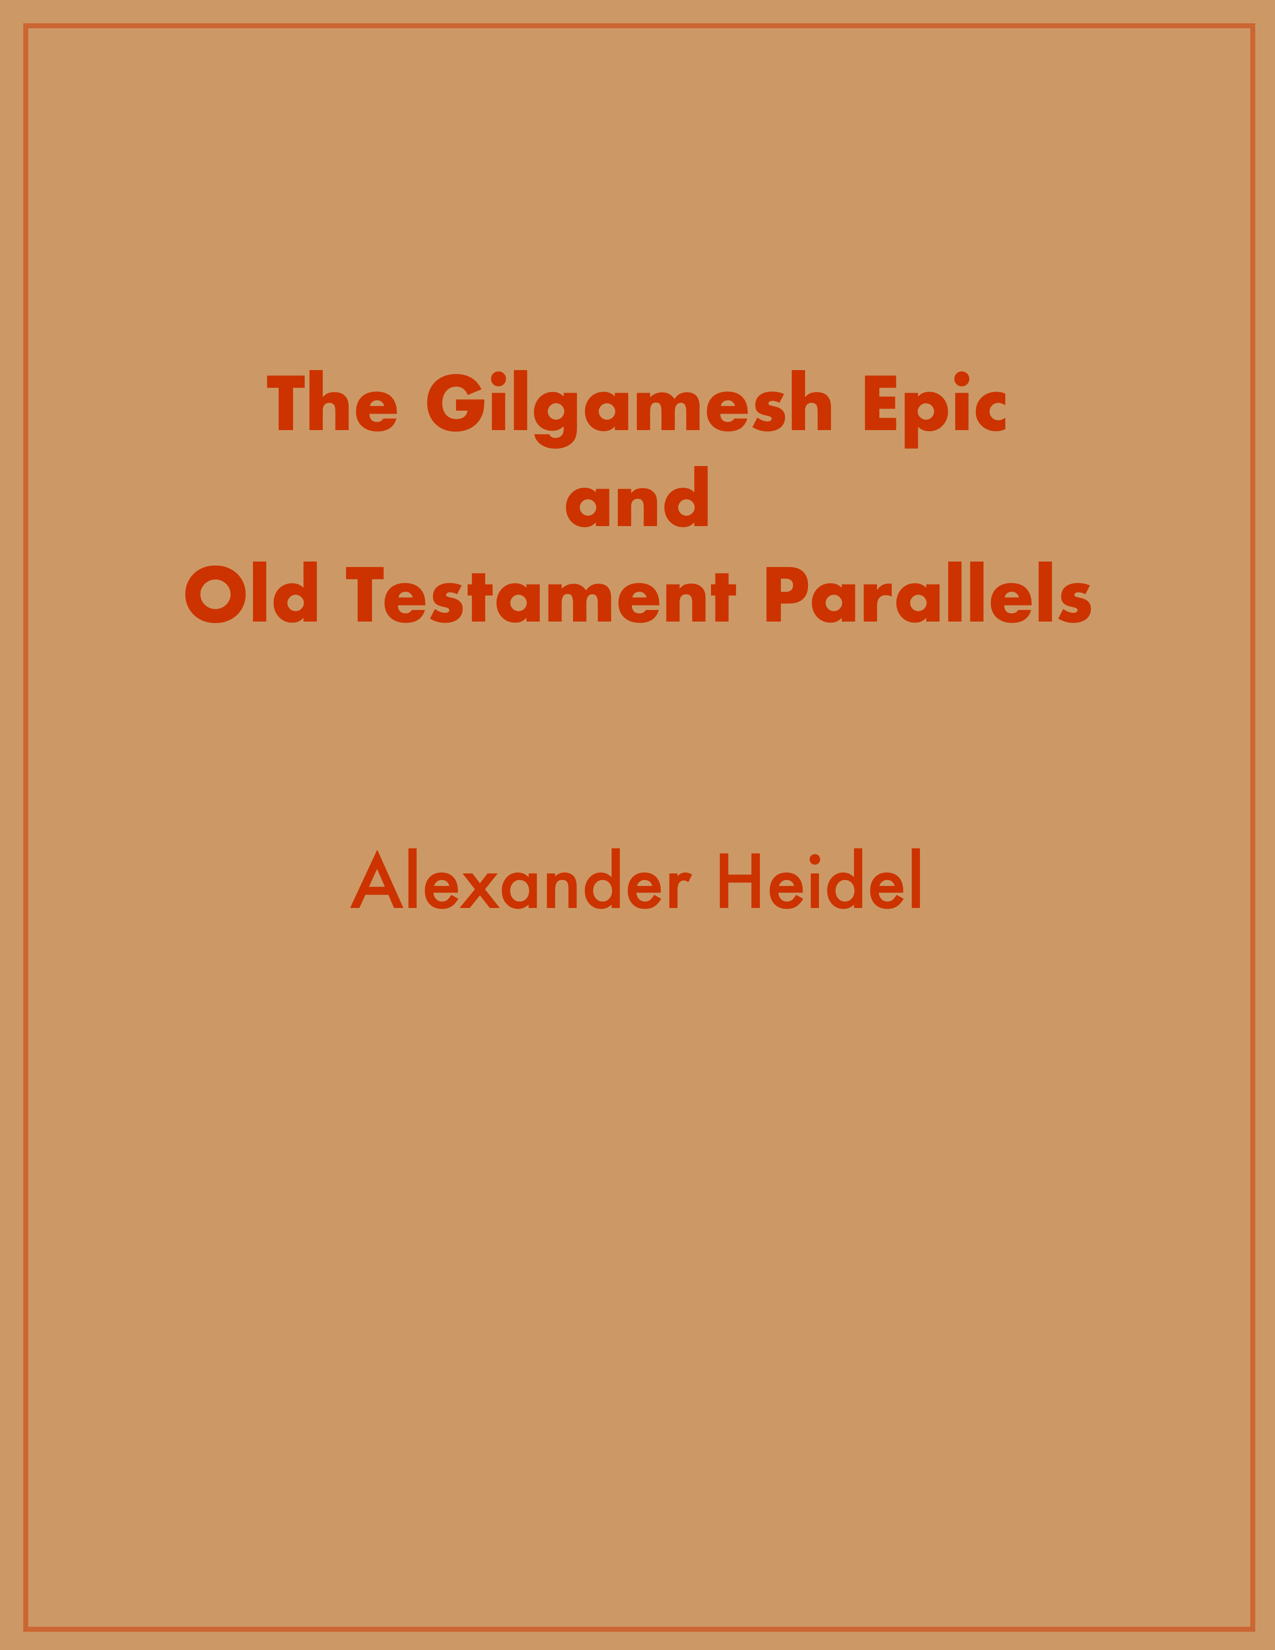 The Distributed Proofreaders Canada eBook of The Gilgamesh Epic and Old Testament Parallels